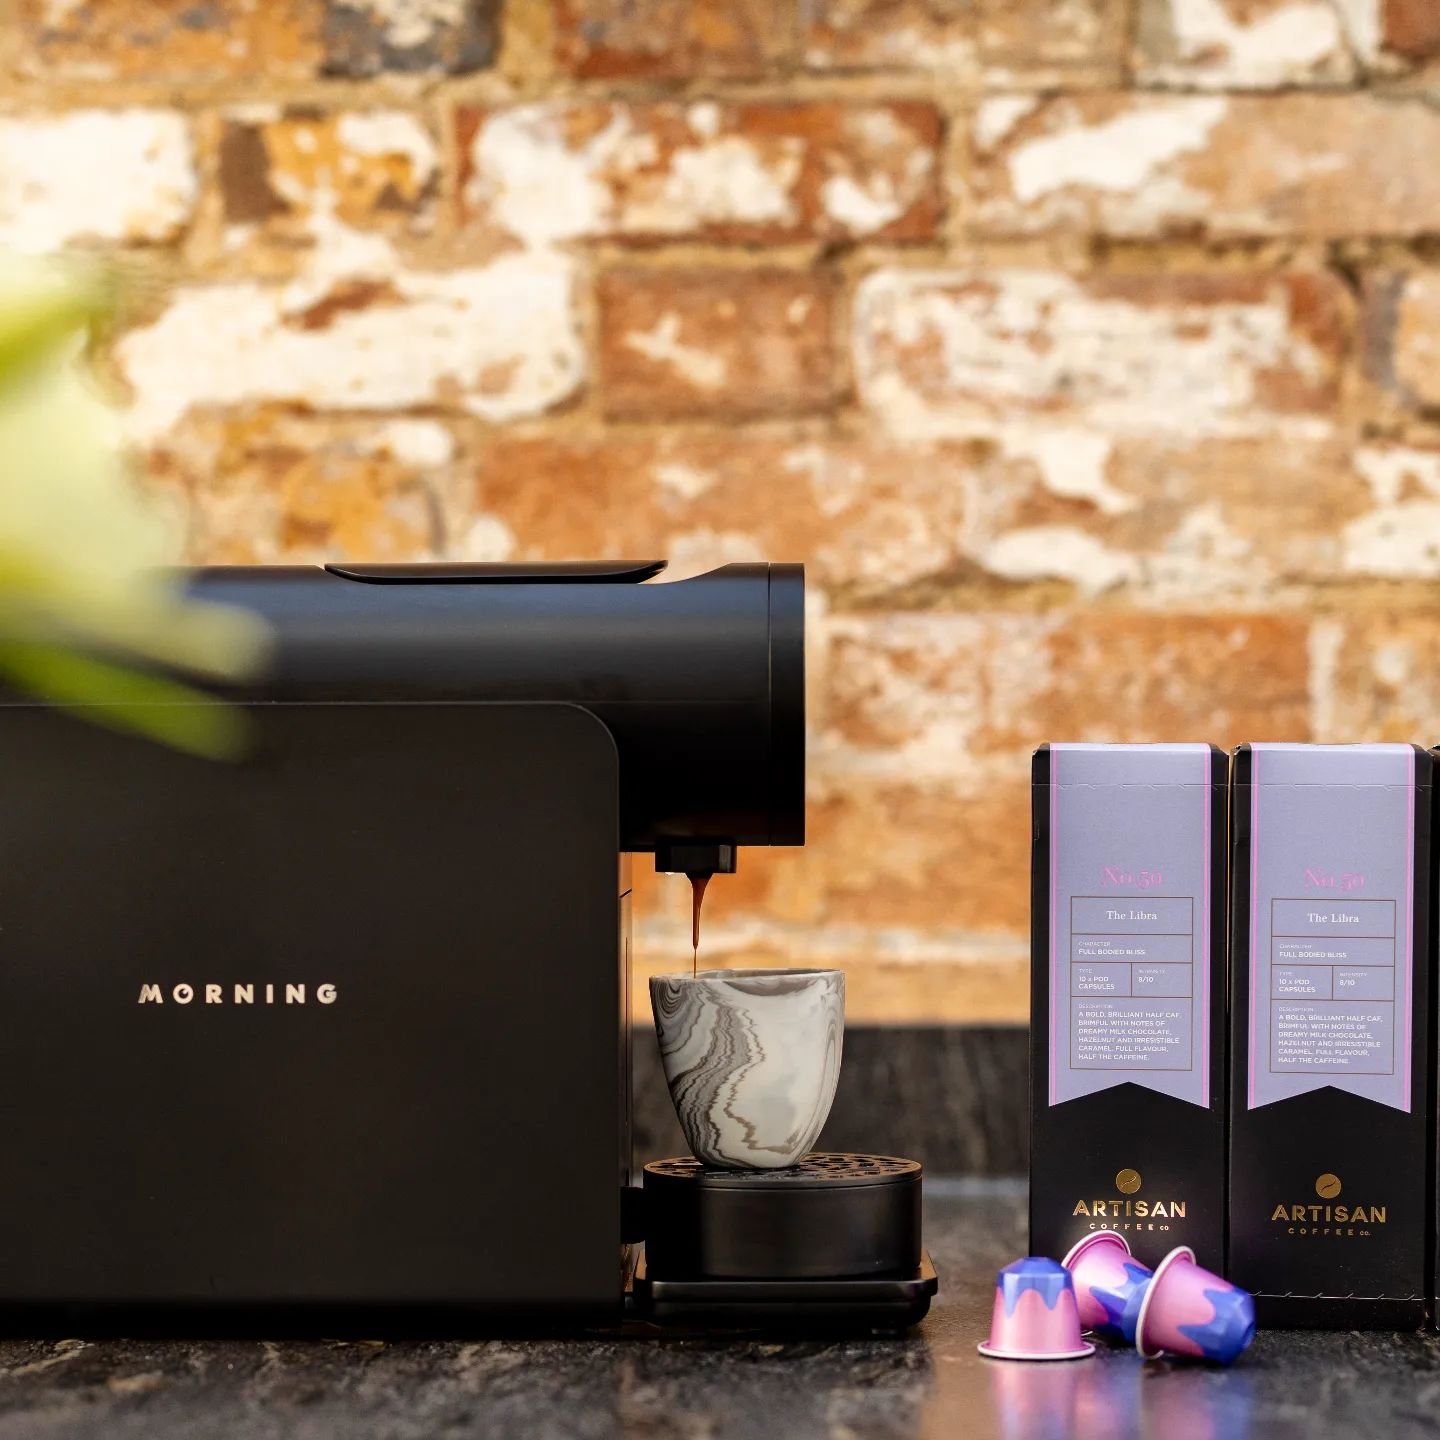 Only 24 hours to go to The LVL SHOWCASE! And to add to the excitement, @artisancoffee_co are giving away one of these fantastic coffee machines (rrp &pound;440)! Simply talk to them at their stand and be in the free draw. Book your place at SHOWCASE 